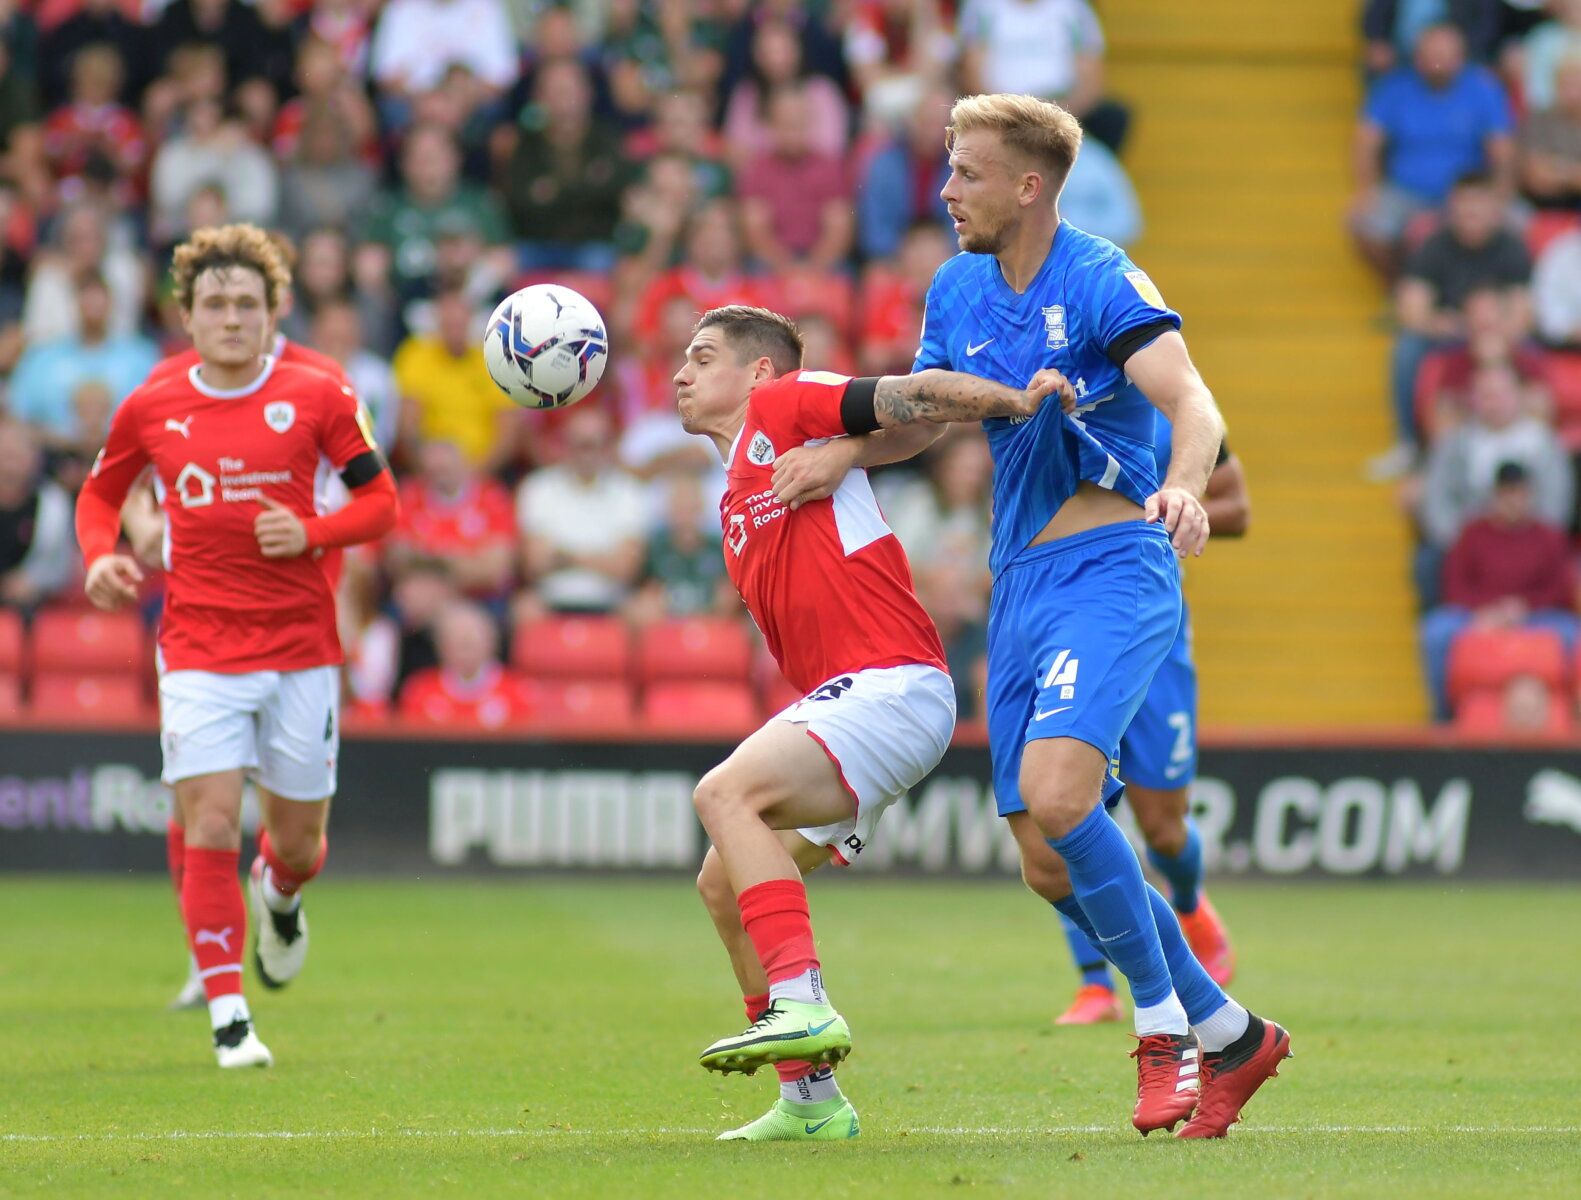 Soccer Football - Championship - Barnsley v Birmingham City - Oakwell, Barnsley, Britain - August 28, 2021  Barnsley's Dominik Frieser in action with Birmingham City's Marc Roberts  Action Images/Paul Burrows    EDITORIAL USE ONLY. No use with unauthorized audio, video, data, fixture lists, club/league logos or "live" services. Online in-match use limited to 75 images, no video emulation. No use in betting, games or single club/league/player publications.  Please contact your account representat